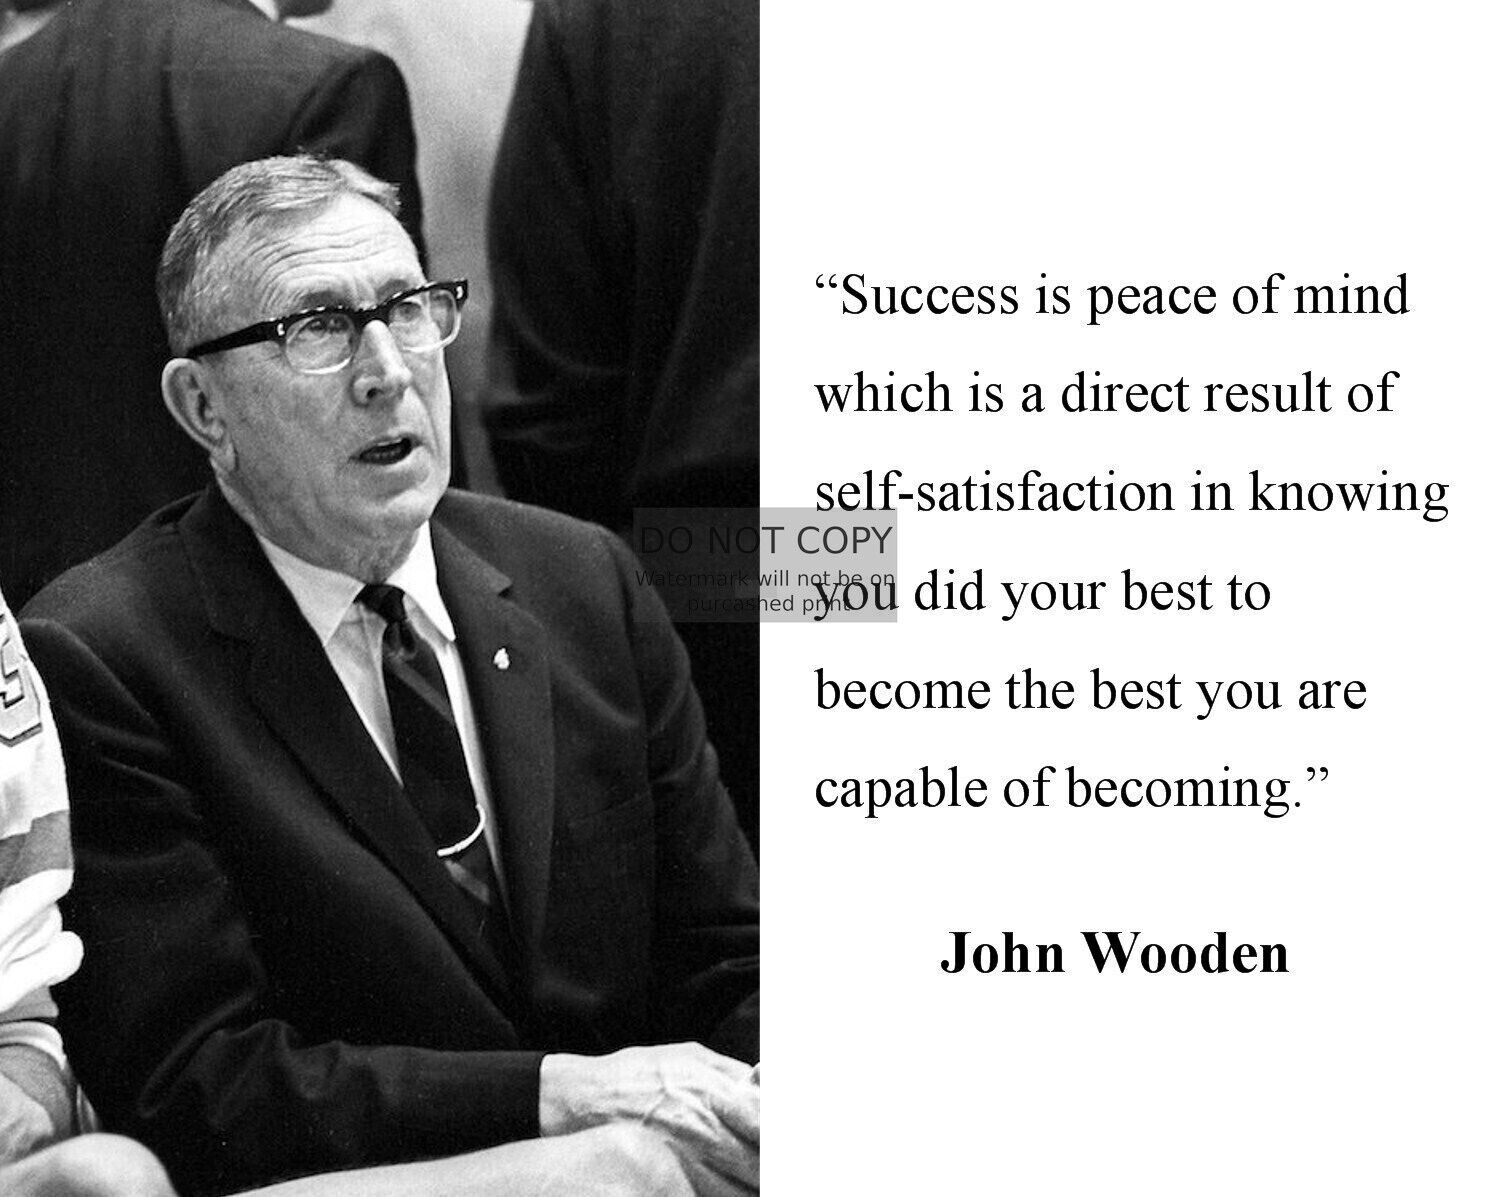 JOHN WOODEN BASKETBALL COACH & PLAYER INSPIRATIONAL QUOTE 8X10 PHOTO